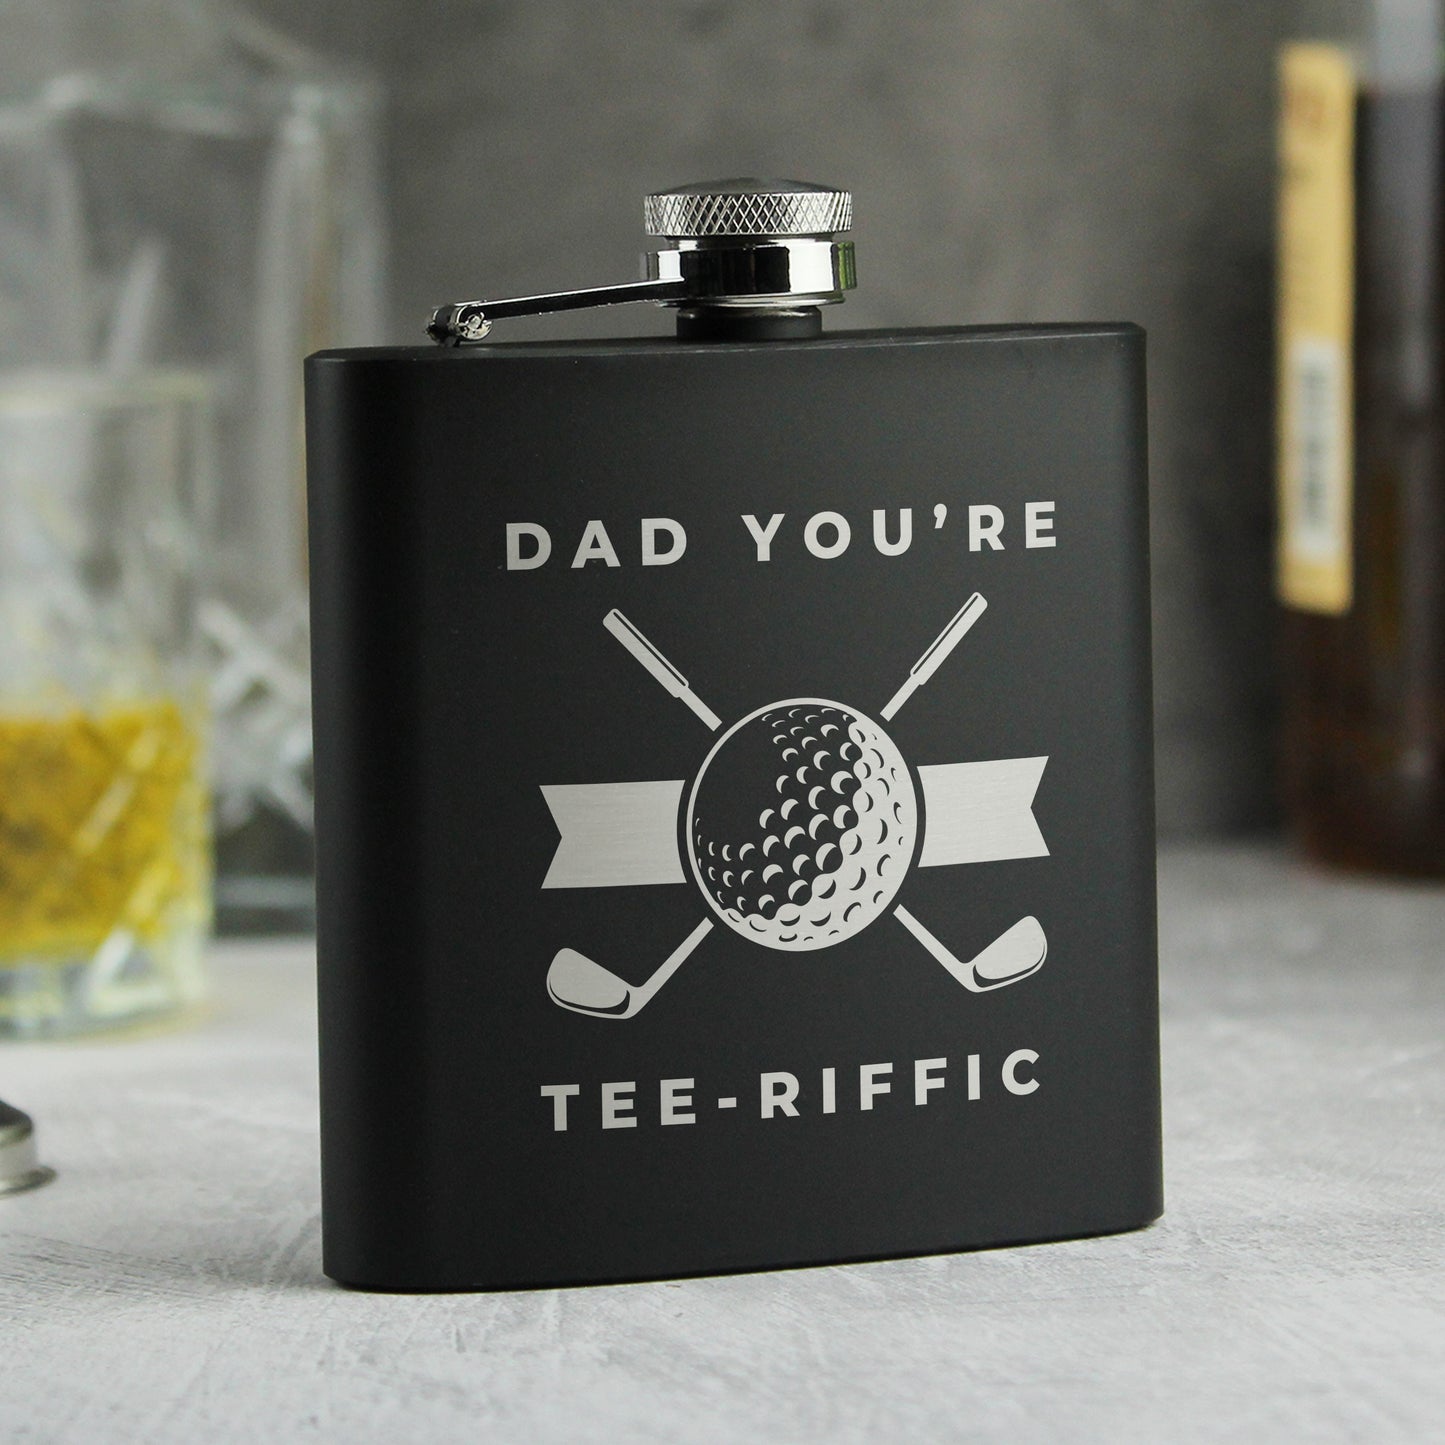 Personalised Golf Black Father's Day Hip Flask - Personalise It!